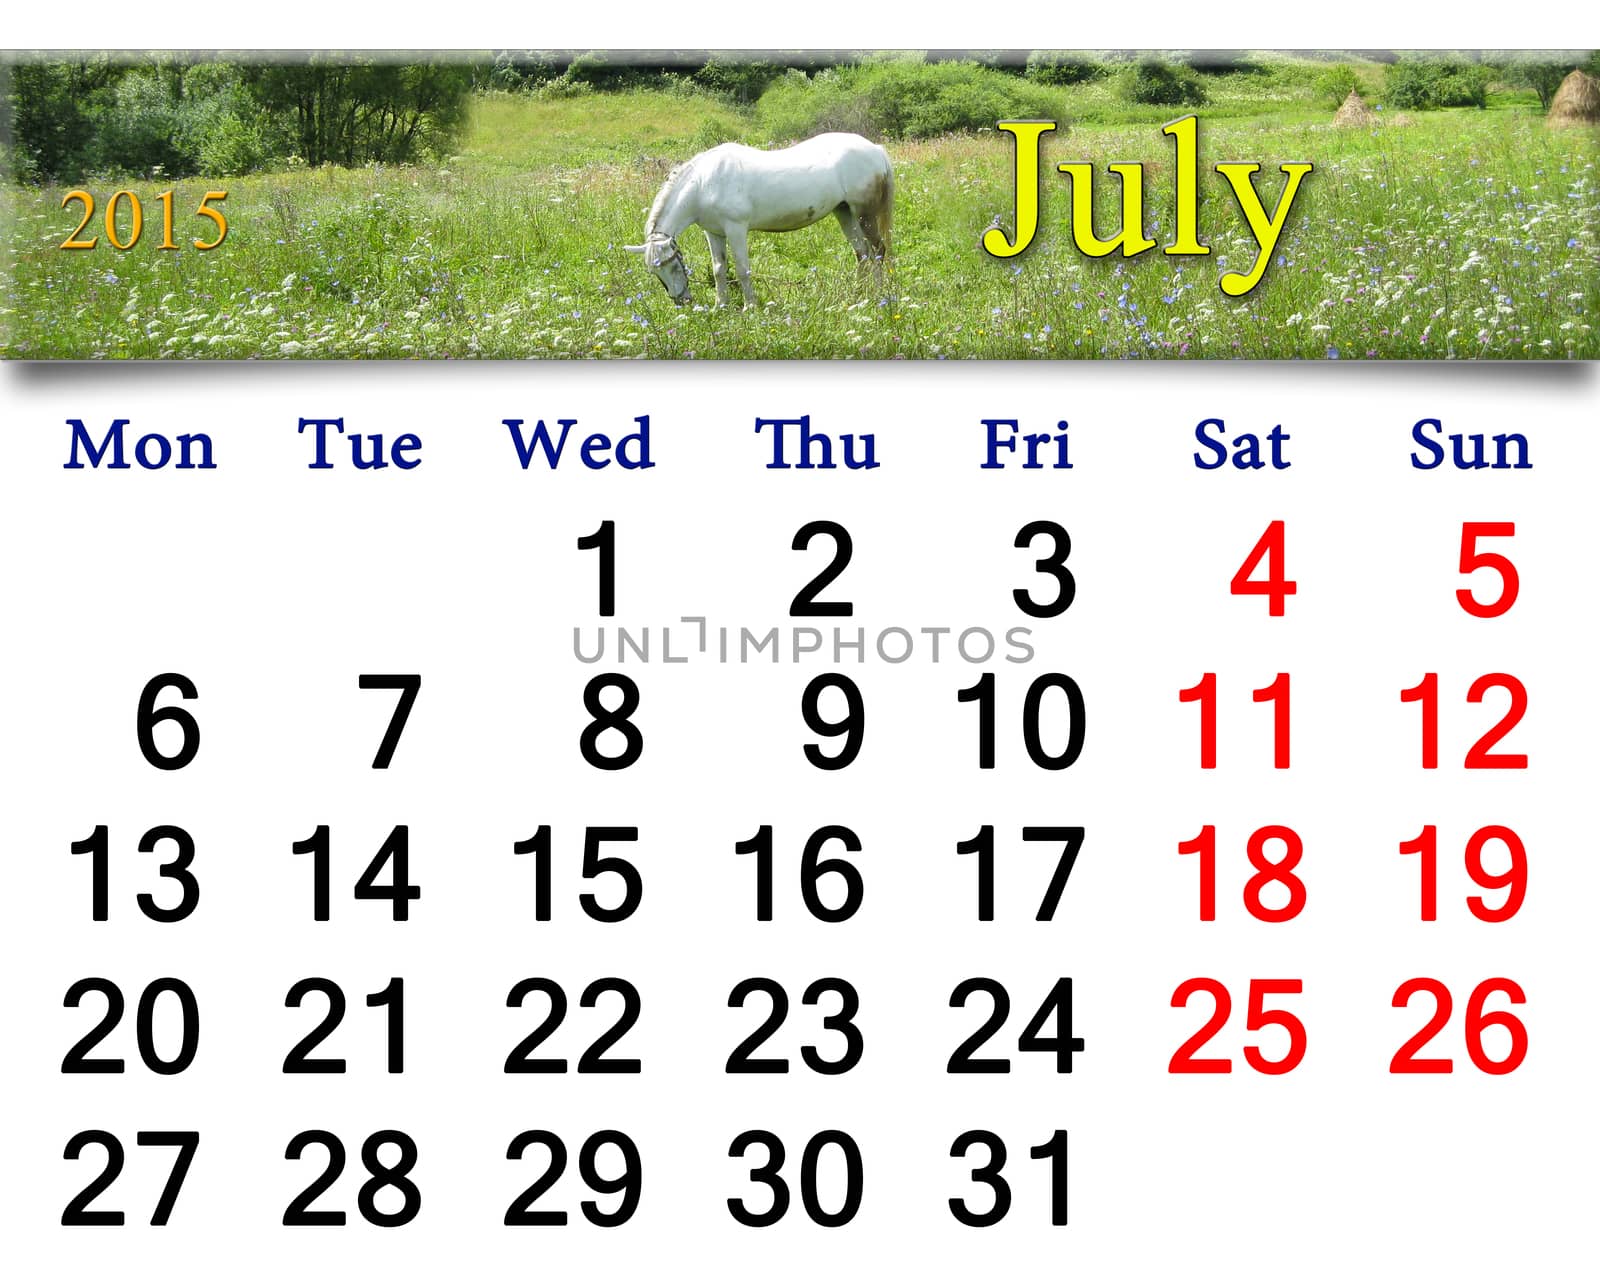 calendar for July of 2015 with horse in field by alexmak